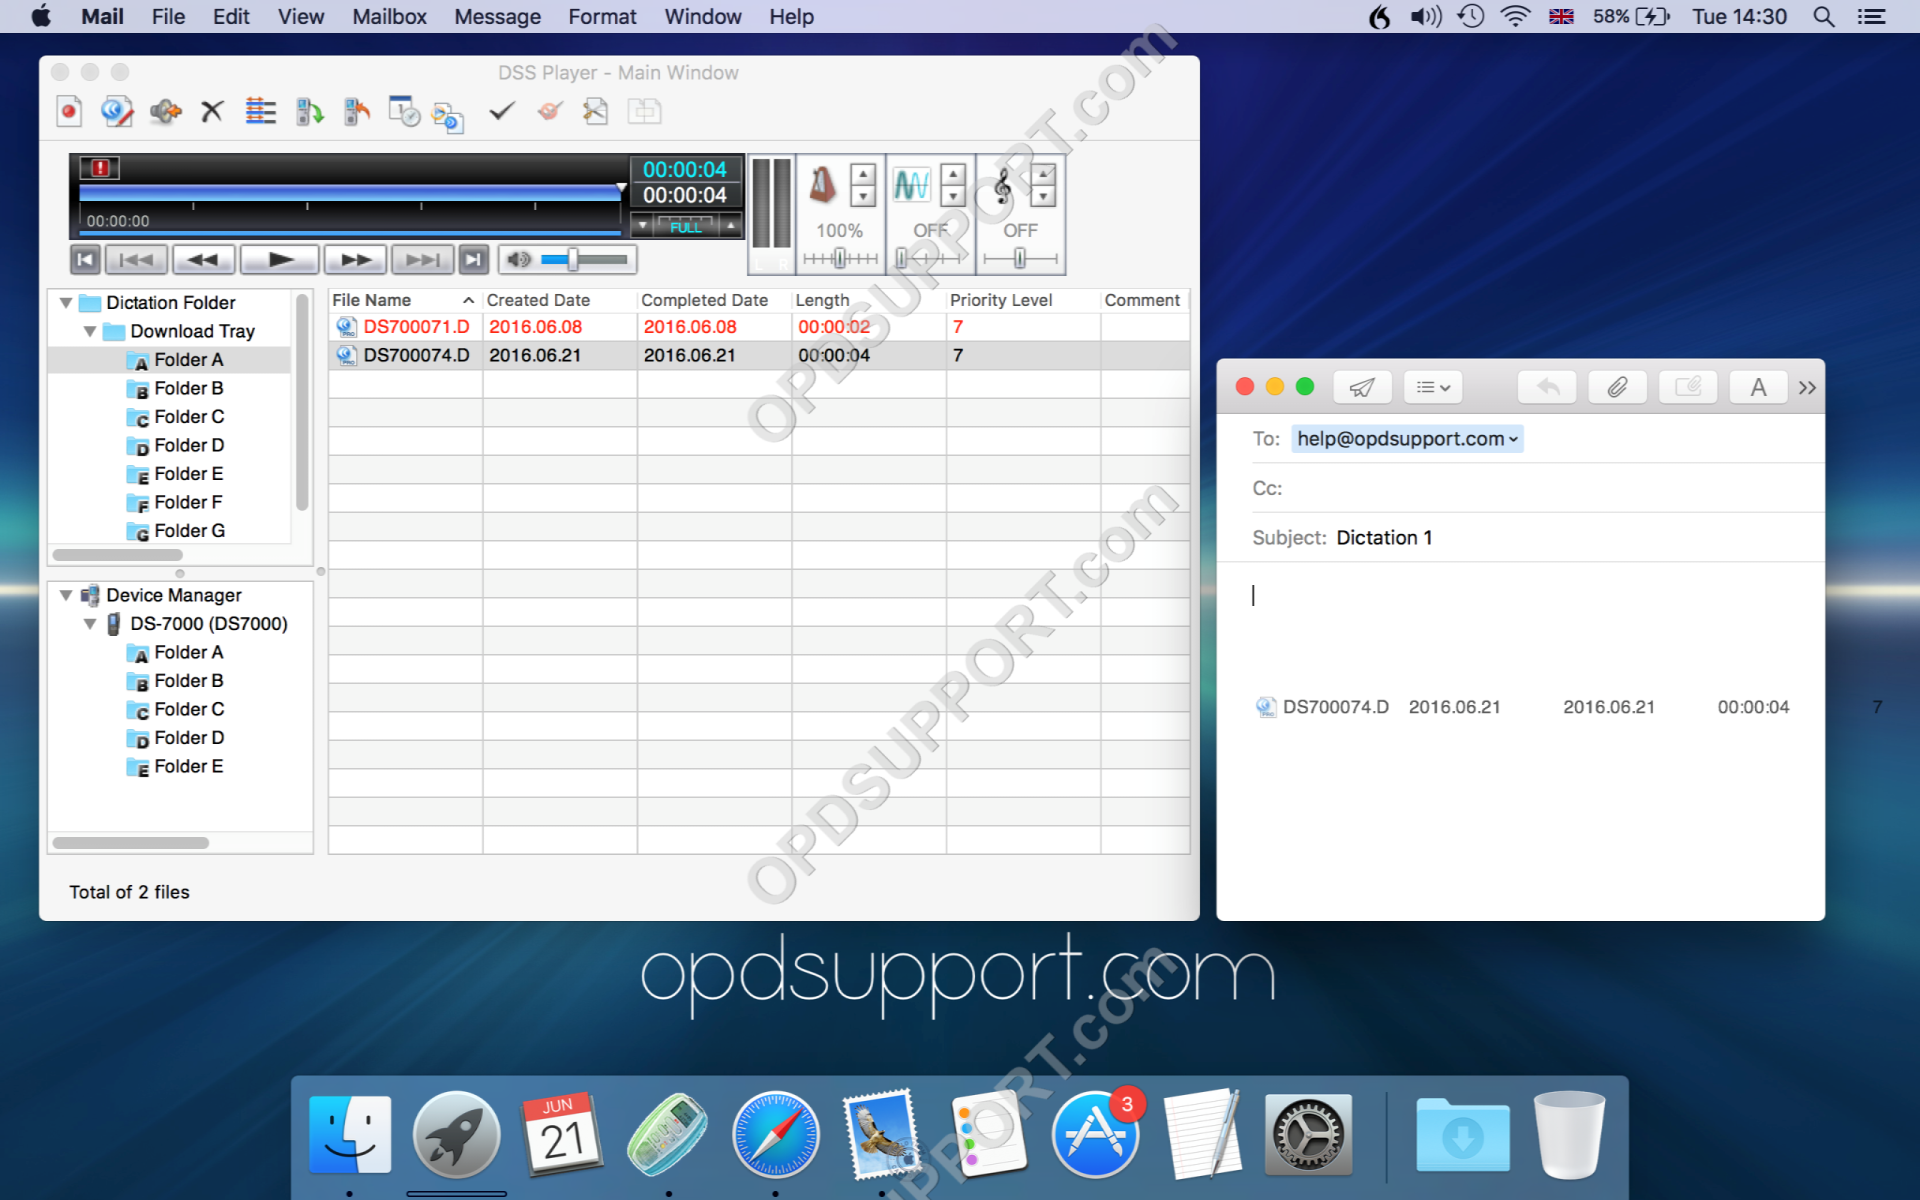 DSS Player for Mac. Send dictation by Email5